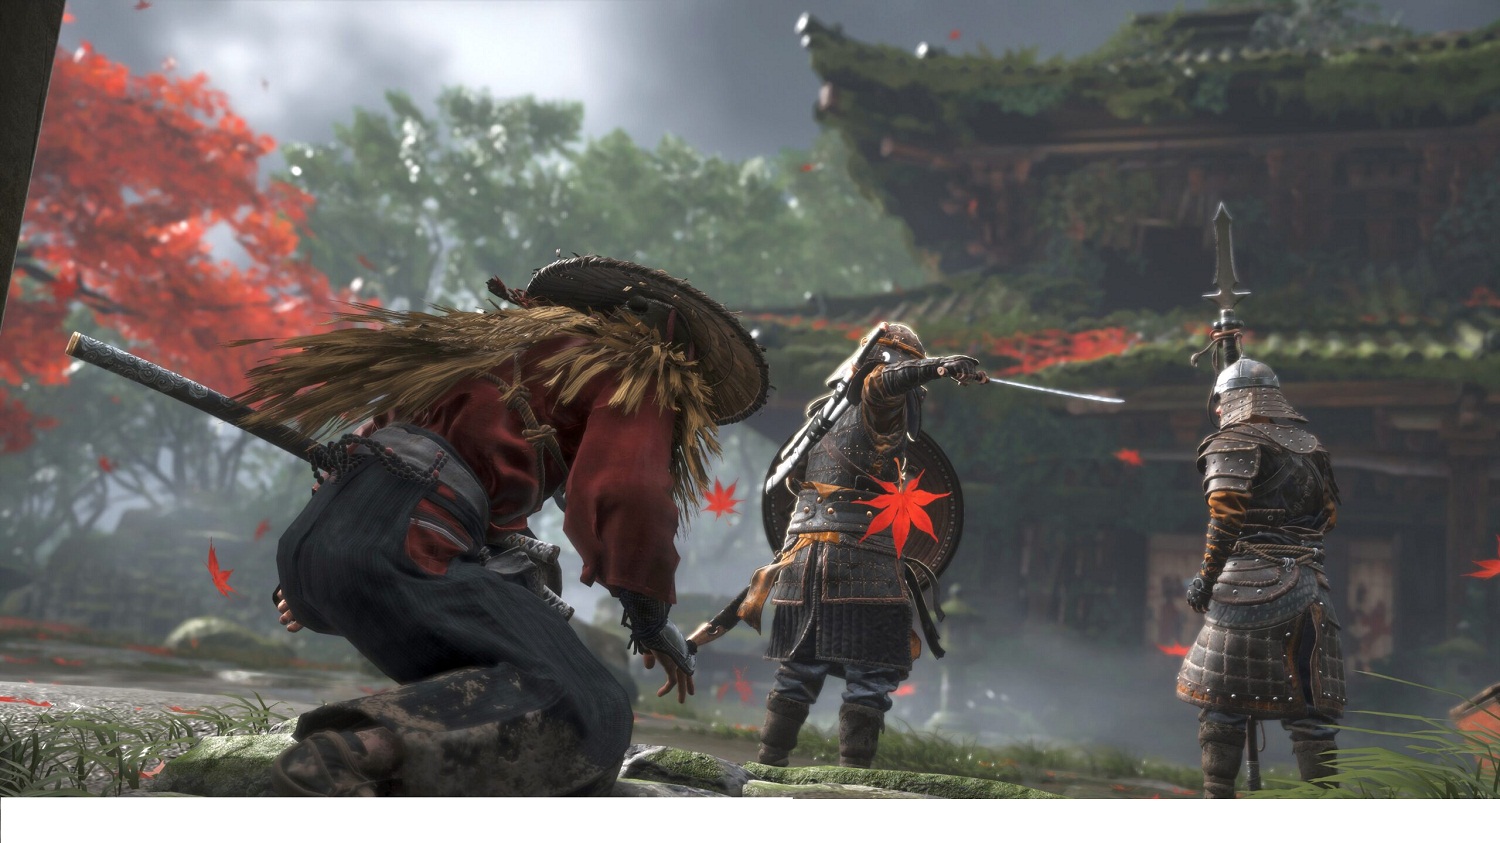 A Multiplayer StealthAction Game Set In Feudal Japan Has Been Announced By Witcher 3 Veterans.